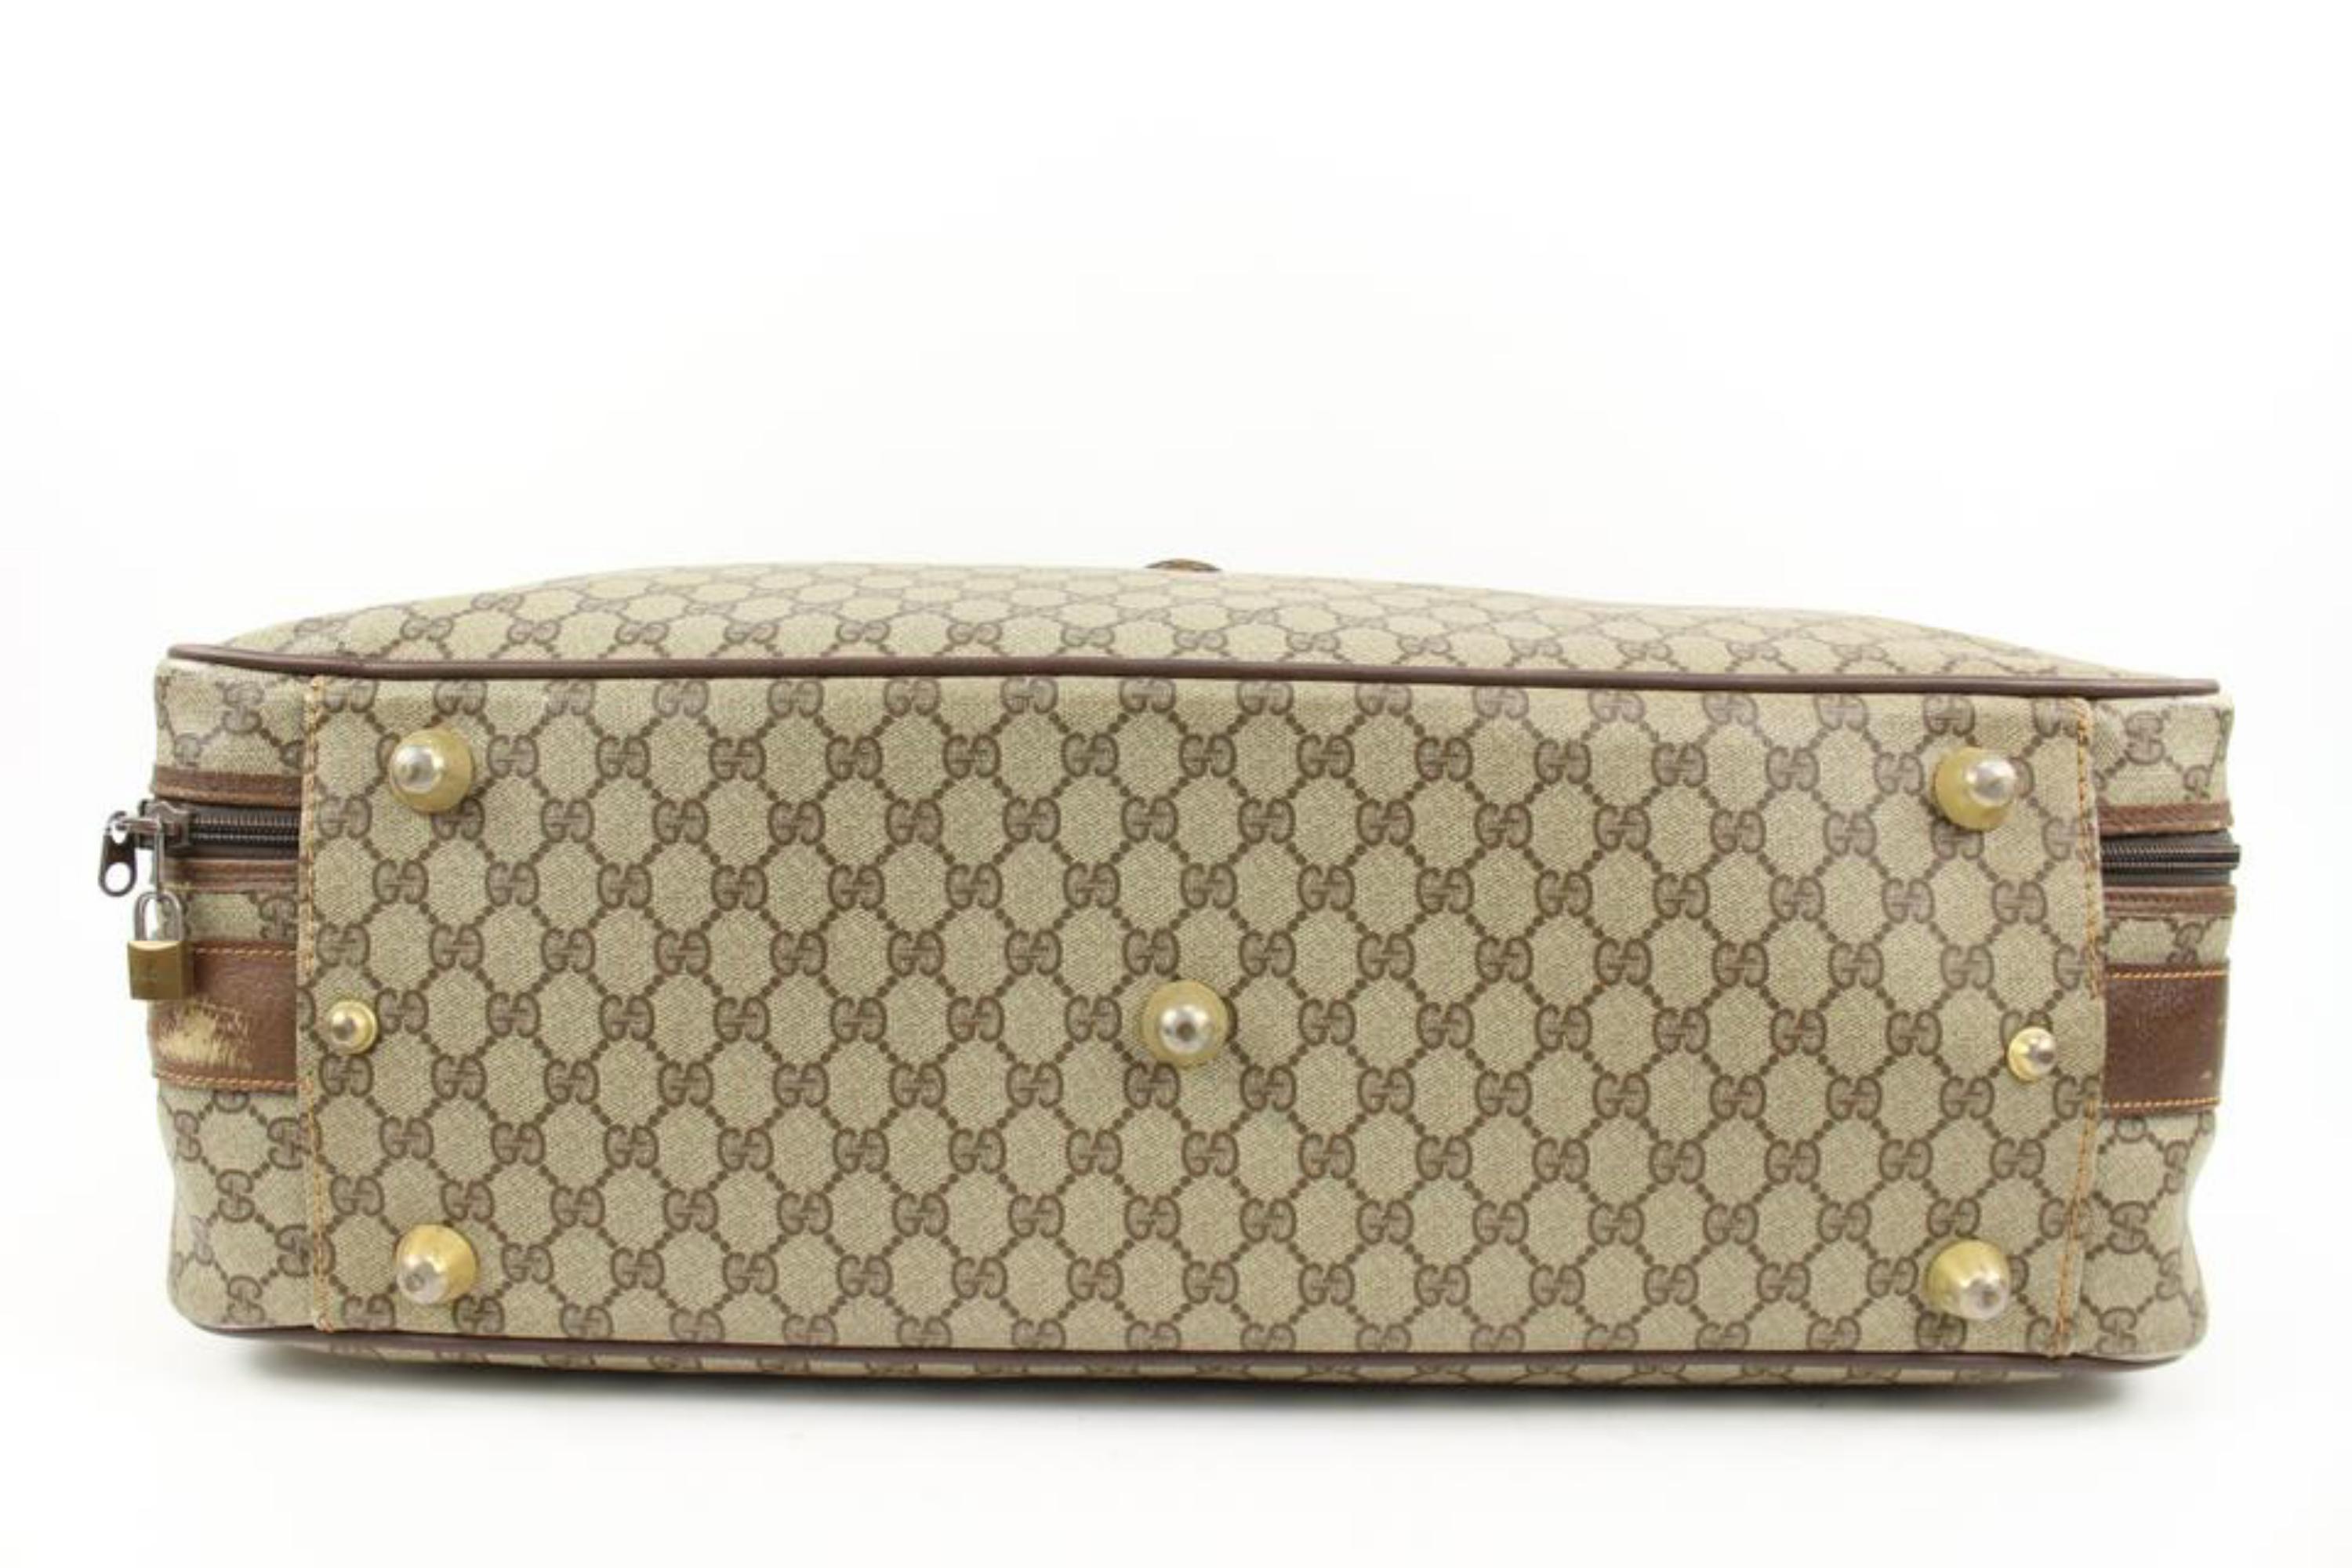 Gucci XL Supreme GG Web Suitcase Soft Trunk Luggage s210g66 In Good Condition For Sale In Dix hills, NY